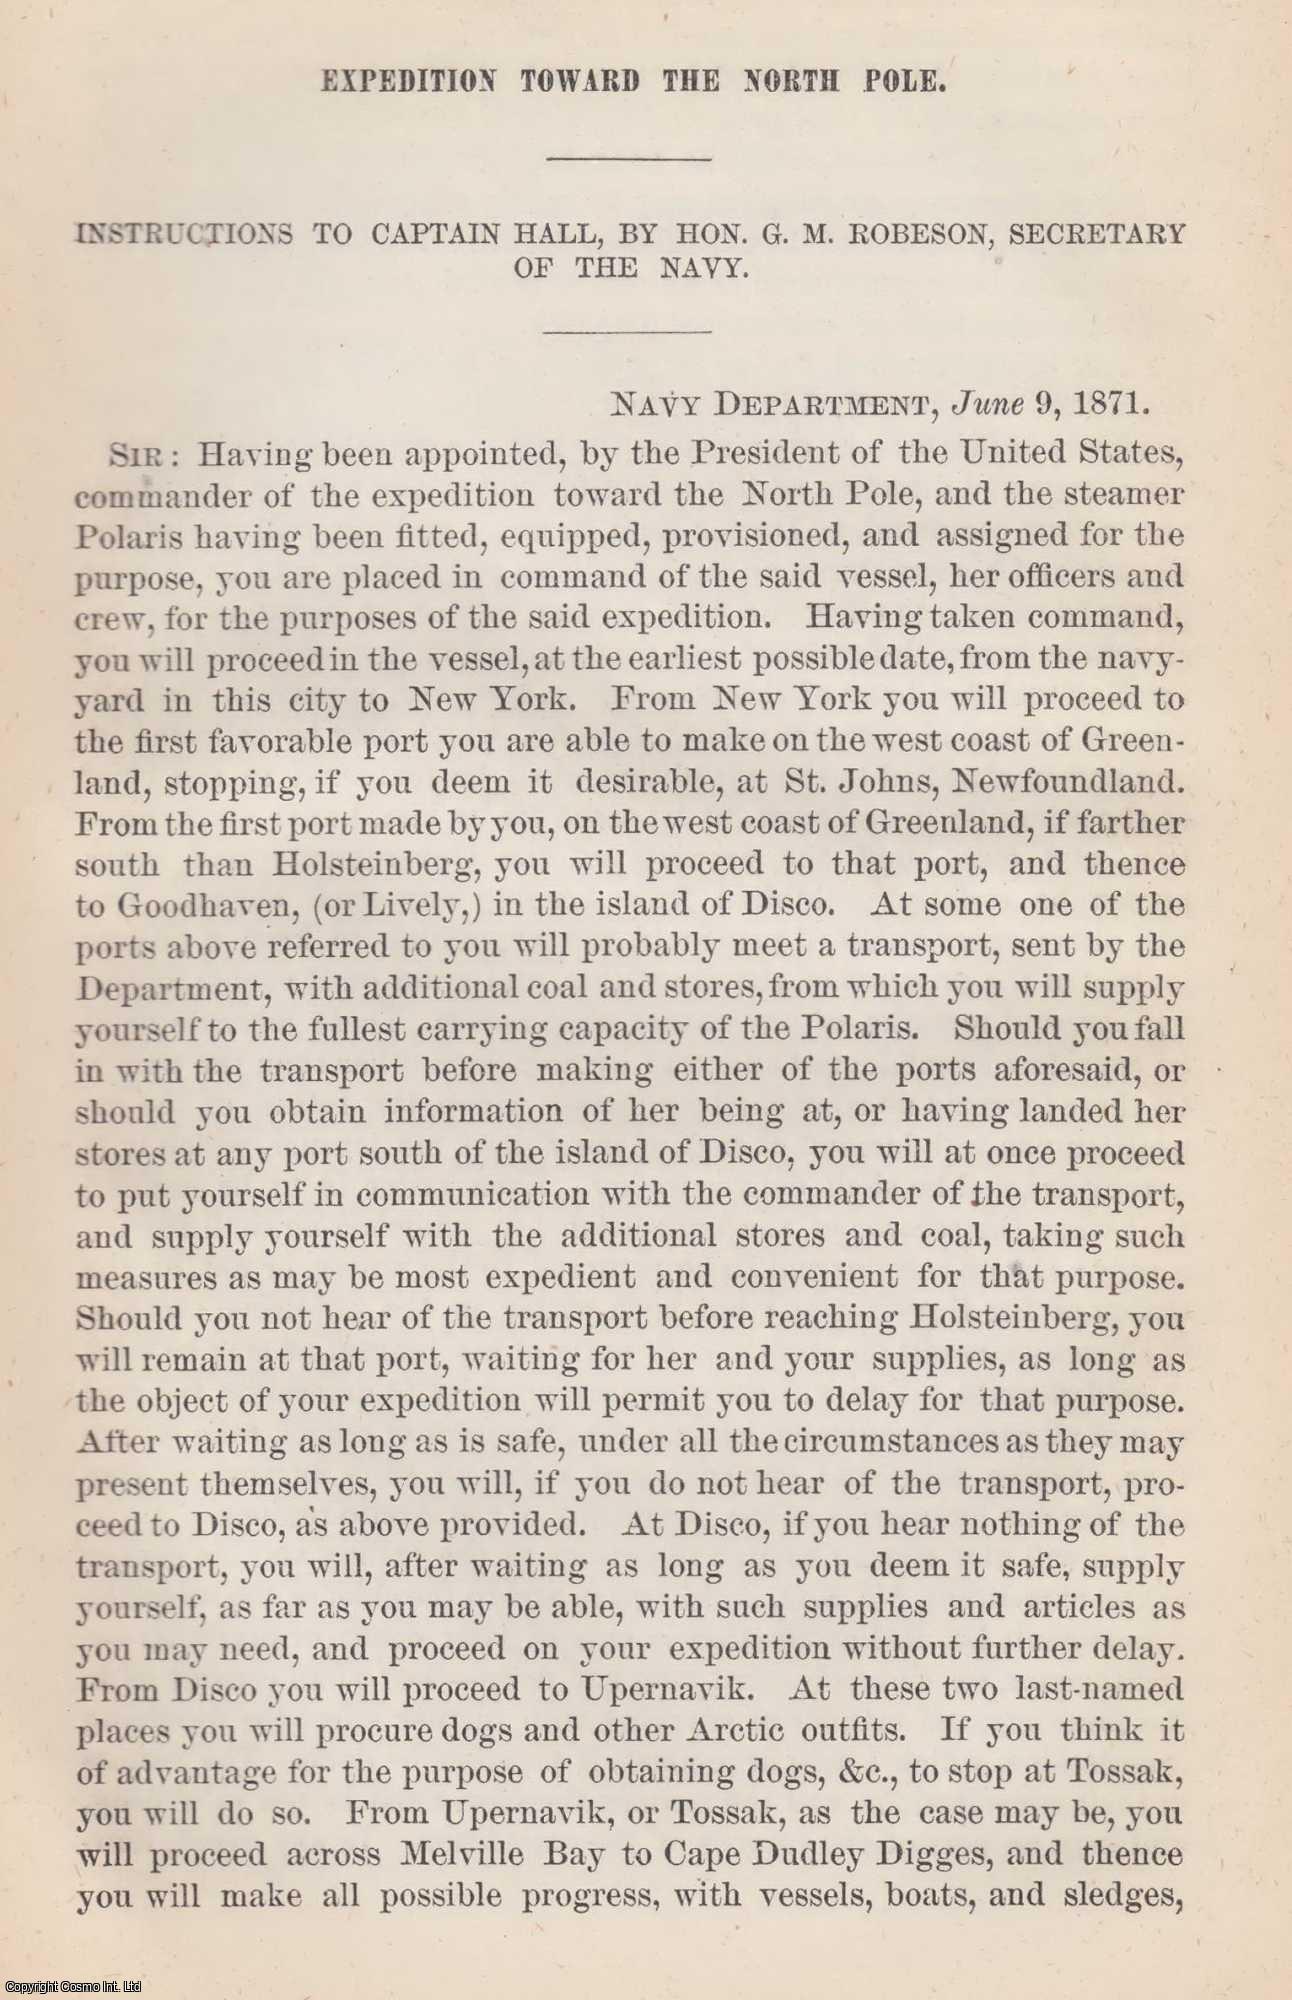 Smithsonian Institution - Expedition Toward The North Pole. Instructions to Captain Hall, by Hon. G.M. Robeson, Secretary of the Navy. An original article from the Report of the Smithsonian Institution, 1871.